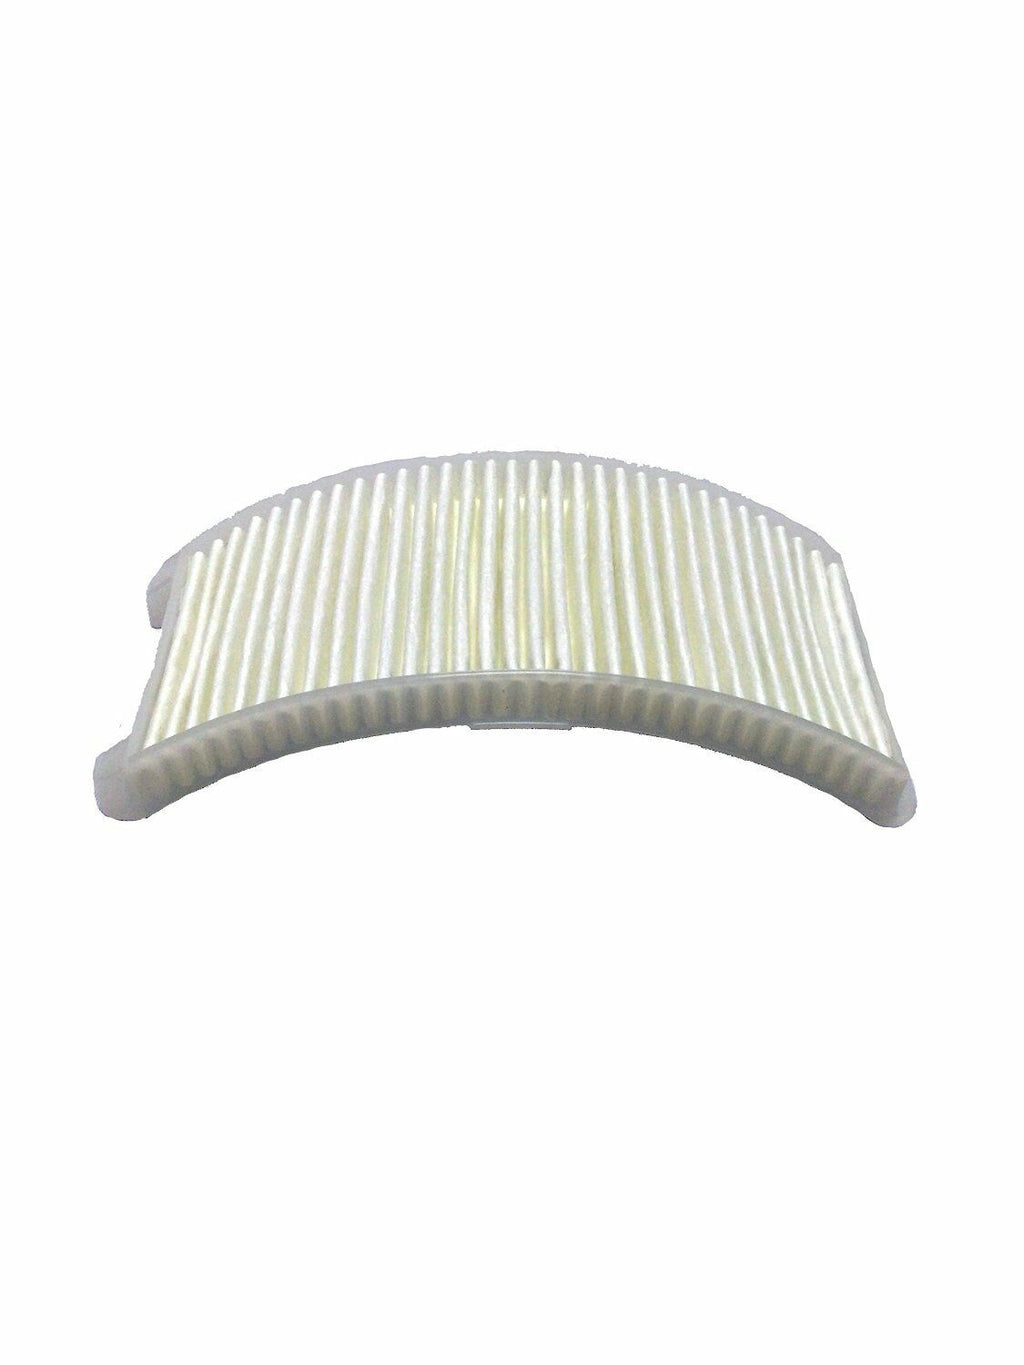 Bissell Hepa Filter Style 12 Part# 2031402 Genuine Filter #2031402